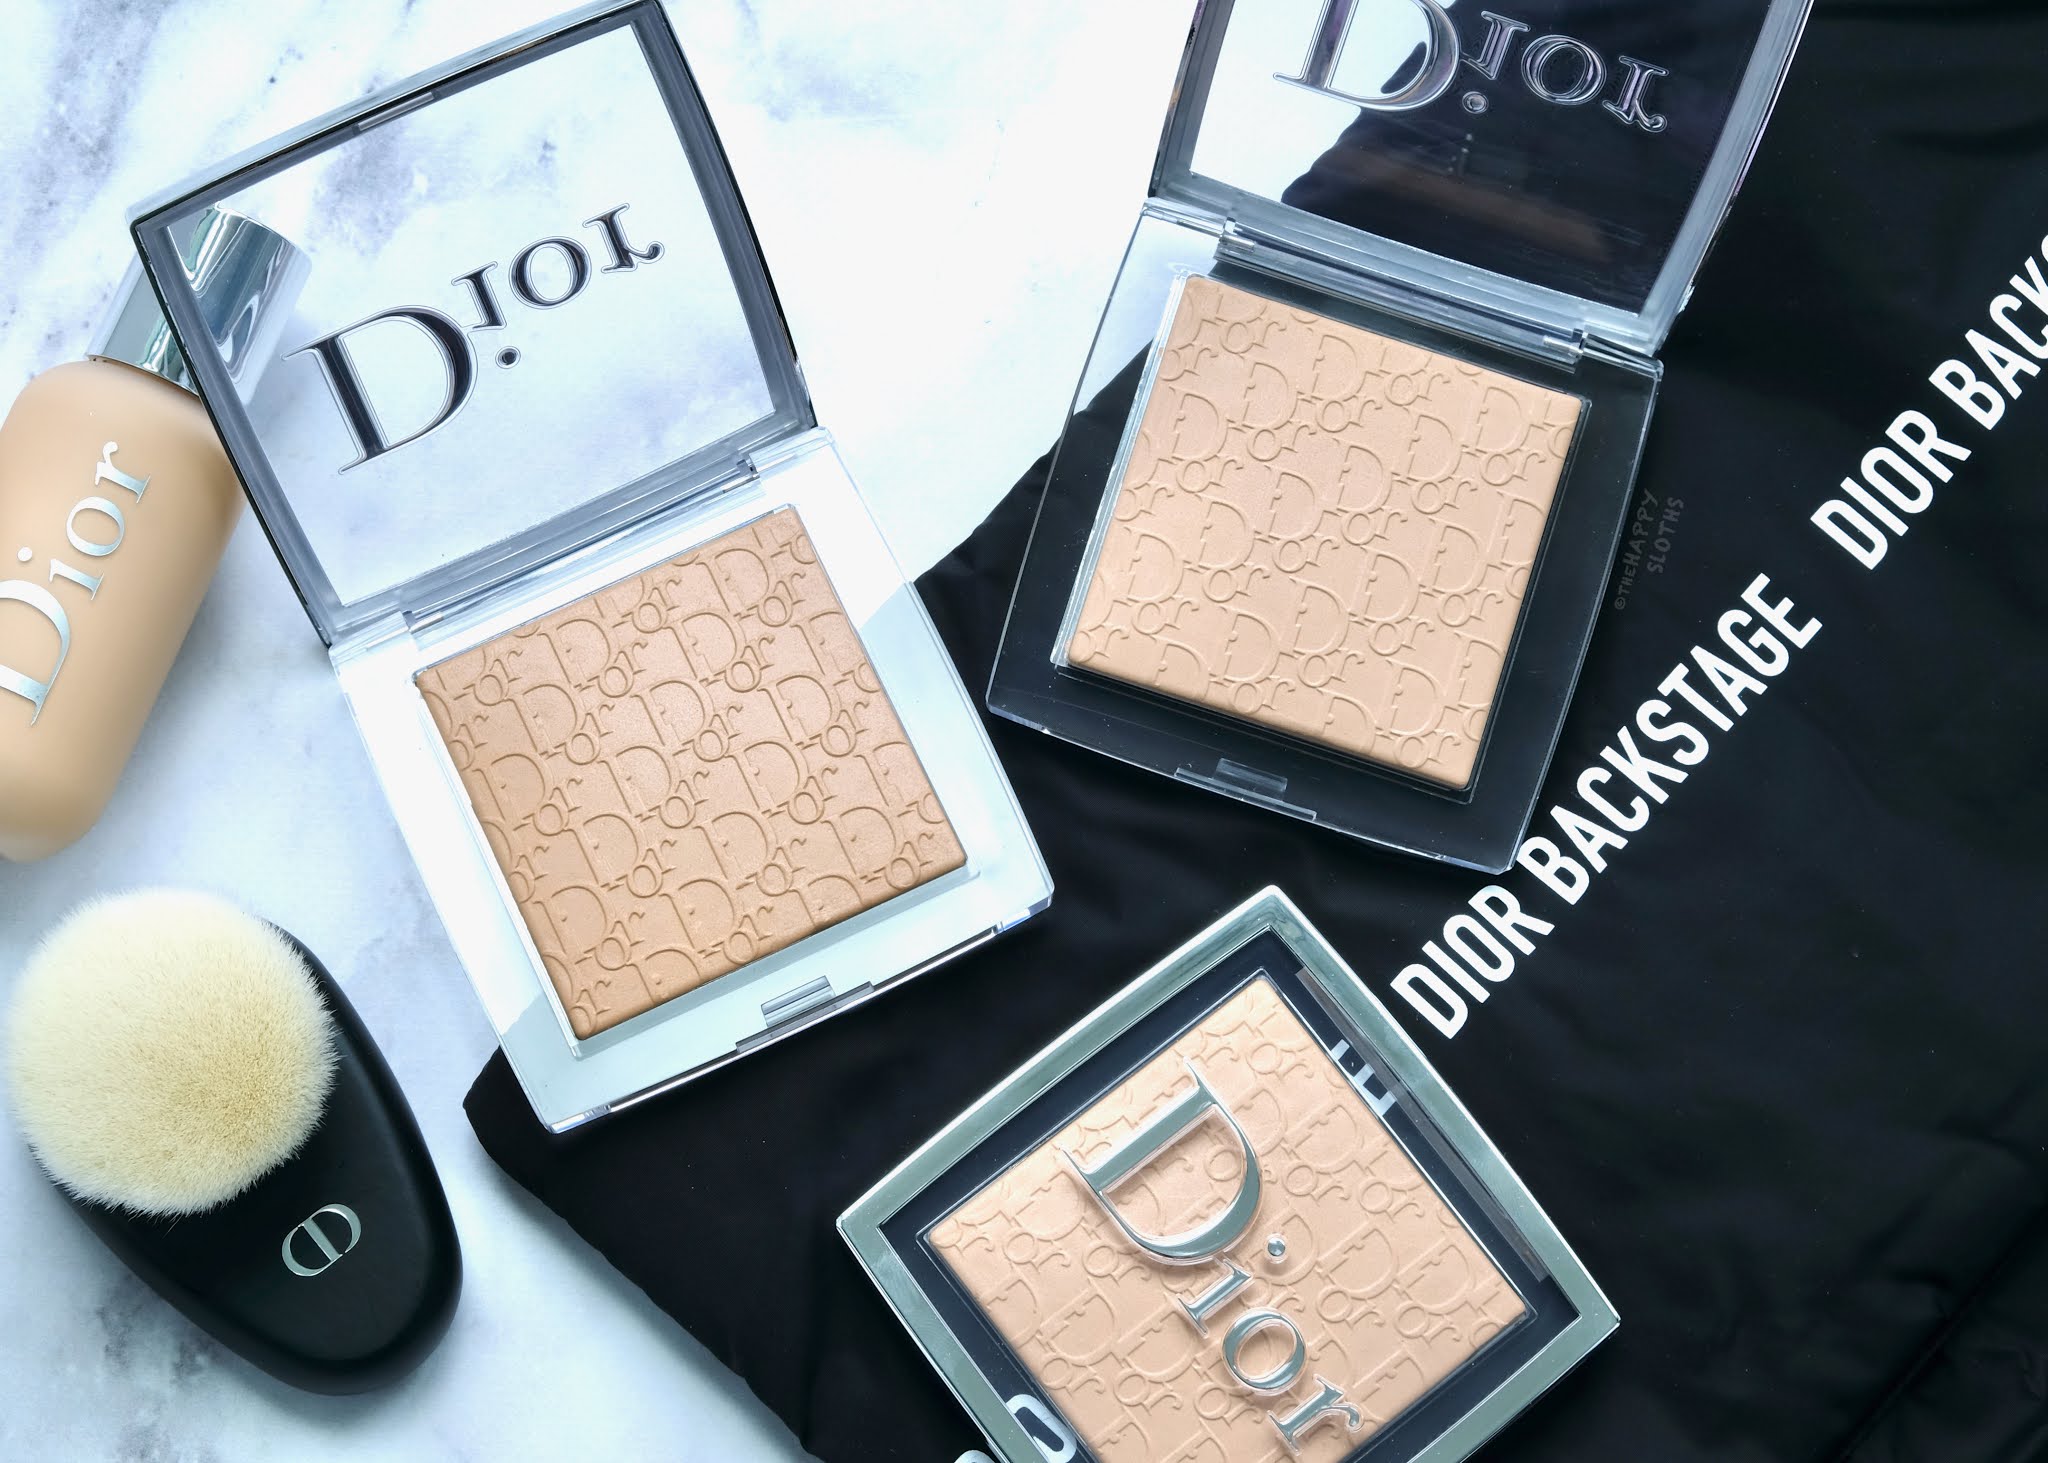 Dior | Backstage Face &amp; Body Powder-No-Powder Perfecting Translucent Powder:  Review and Swatches | The Happy Sloths: Beauty, Makeup, and Skincare Blog  with Reviews and Swatches